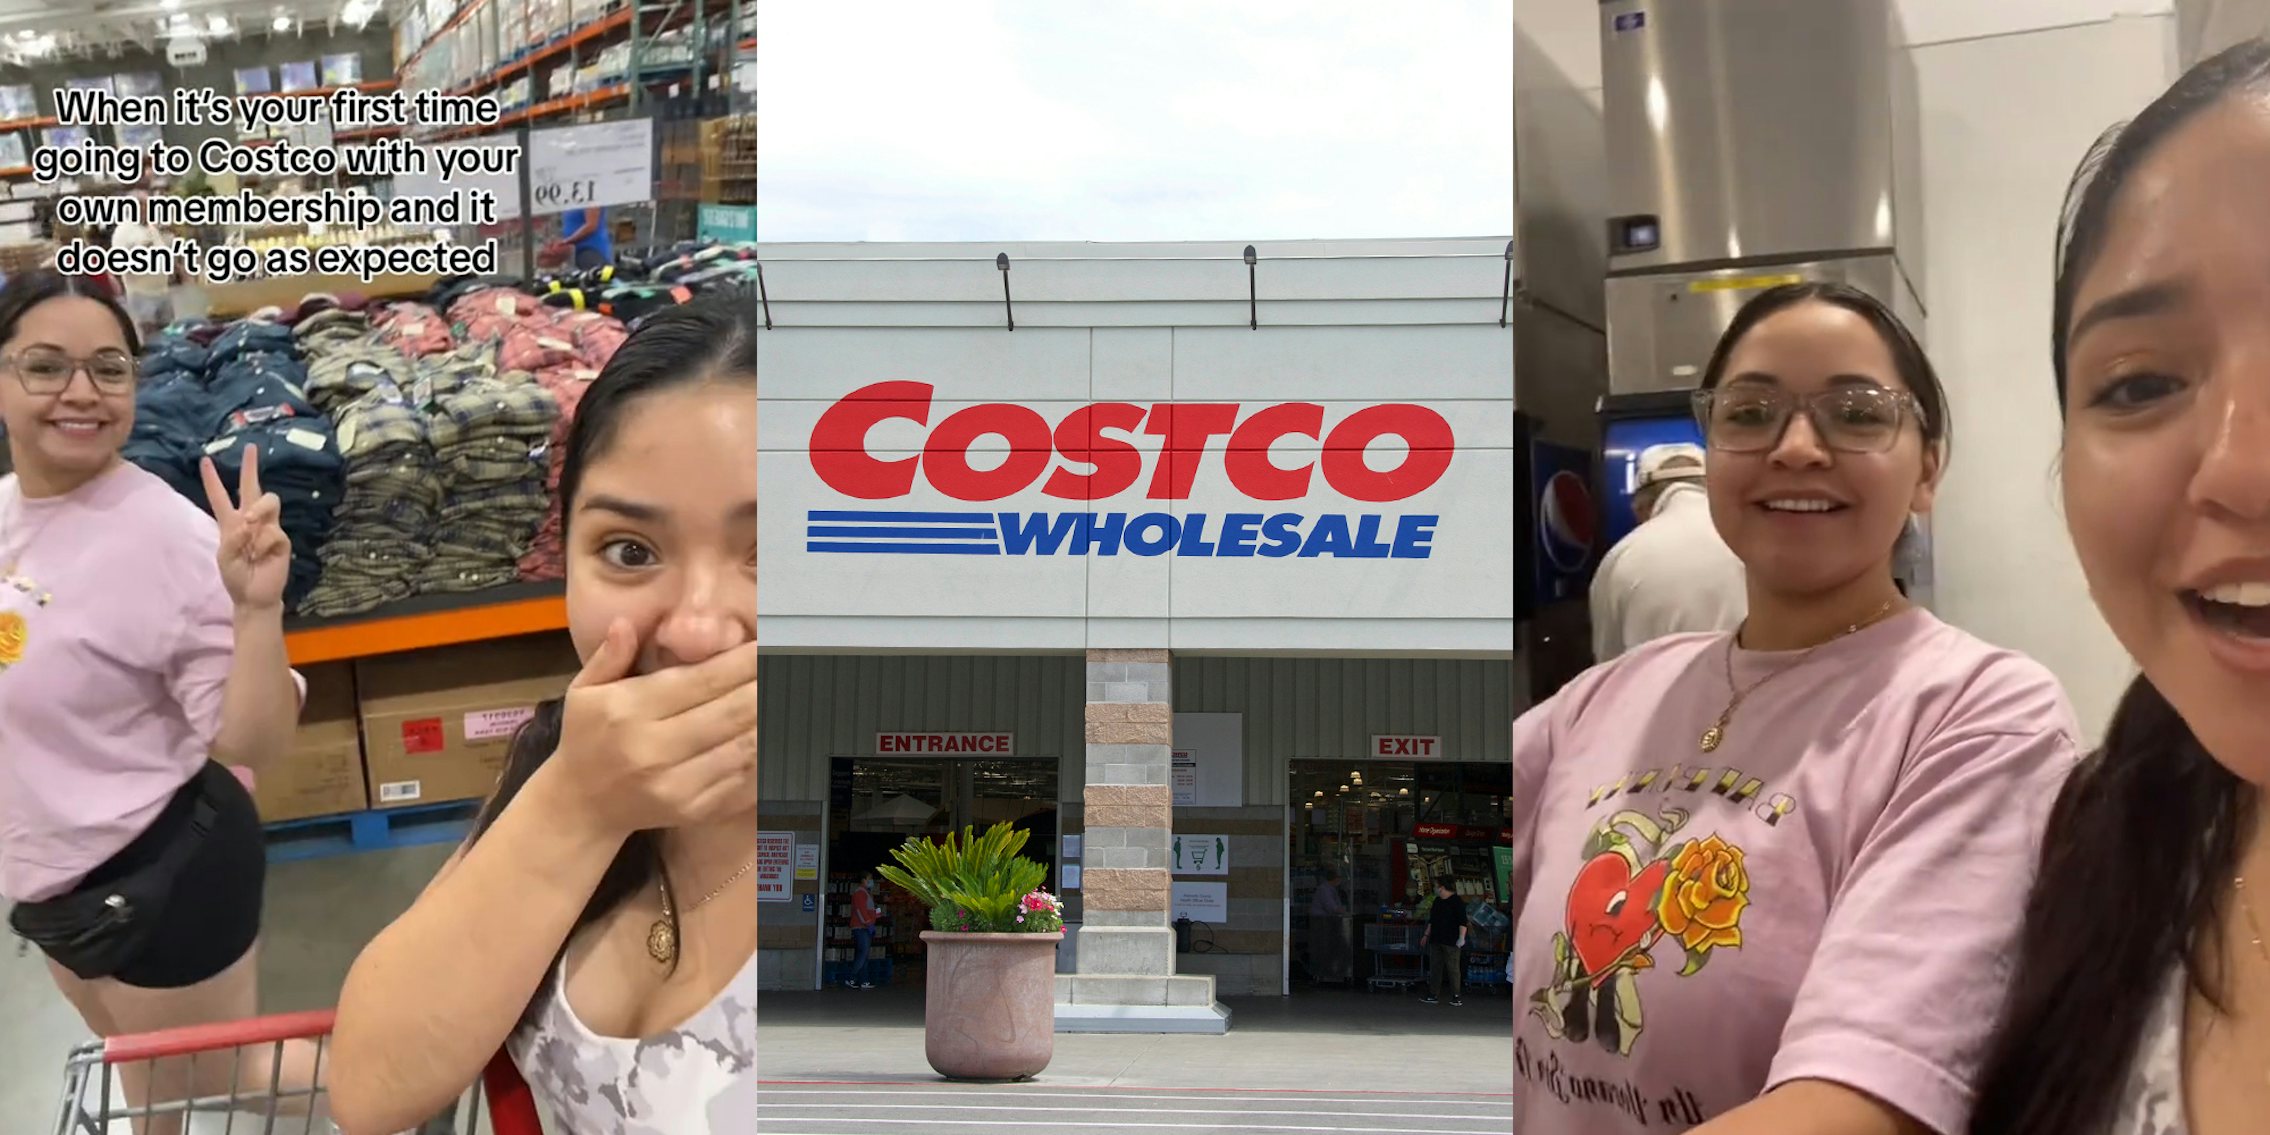 Costco customers with caption 'When it's your first time going to Costco with your own membership and it doesn't go as expected' (l) Costco building with sign (c) Costco customers speaking (r)